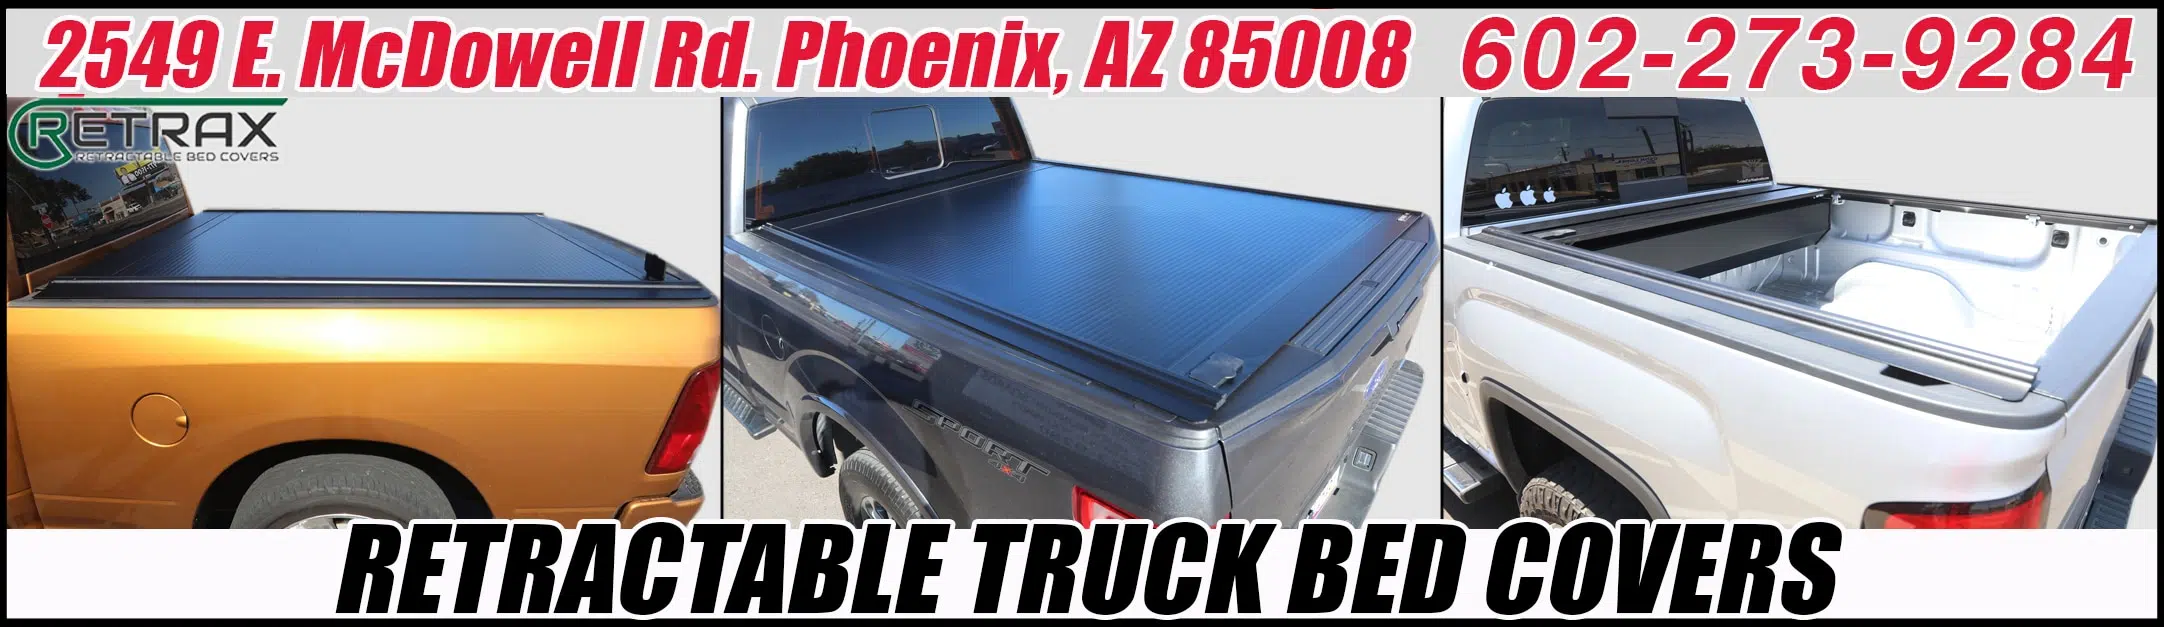 retractable truck bed cover